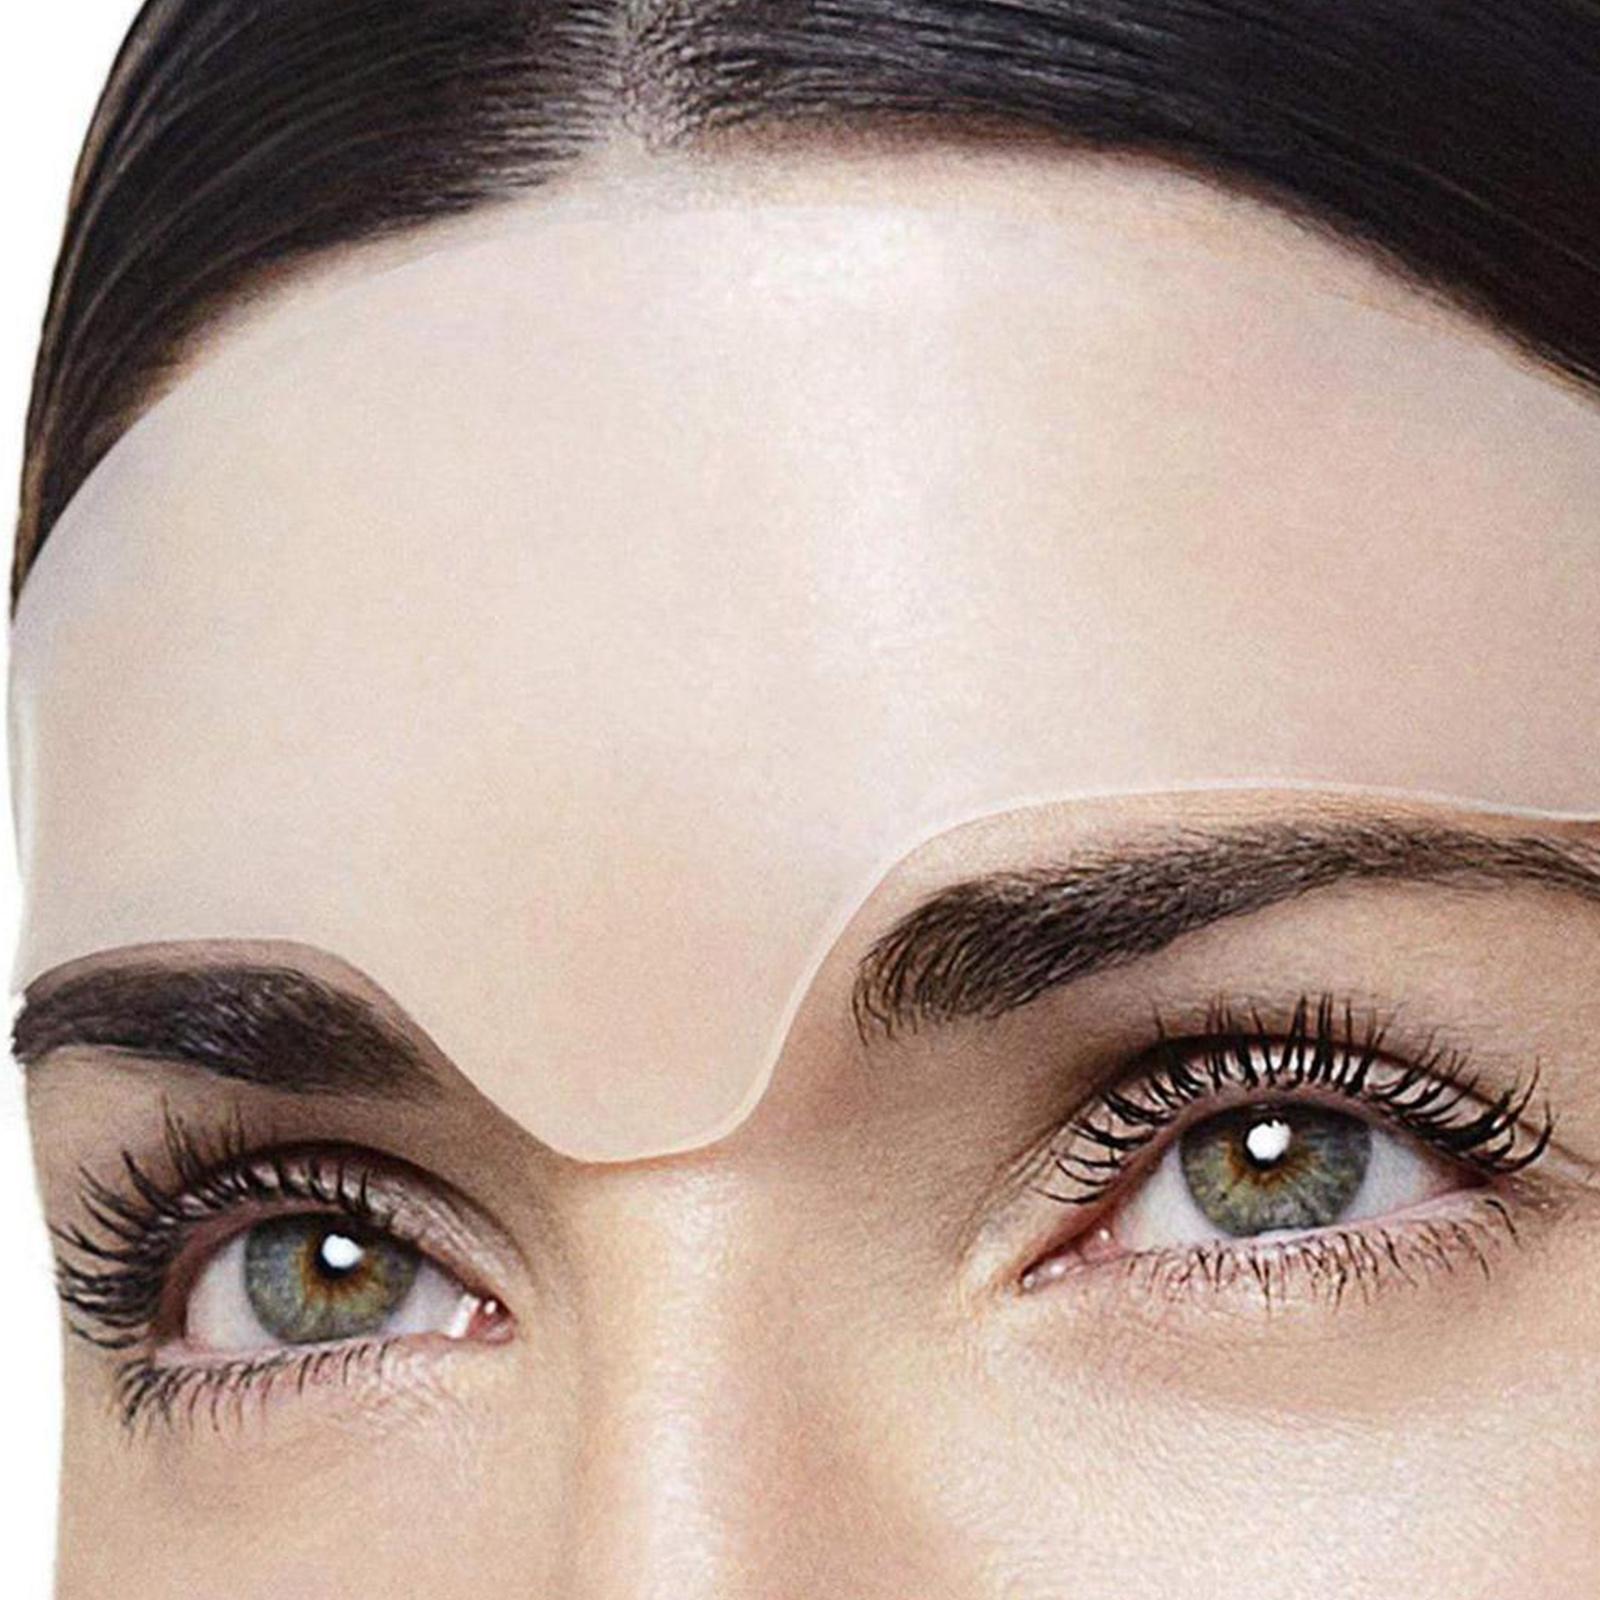 

Wrinkle Forehead Patch Forehead Line Gel Patch Eye Mask Firming Lift Up Mask Stickers Smooth Wrinkle Face Skin Care